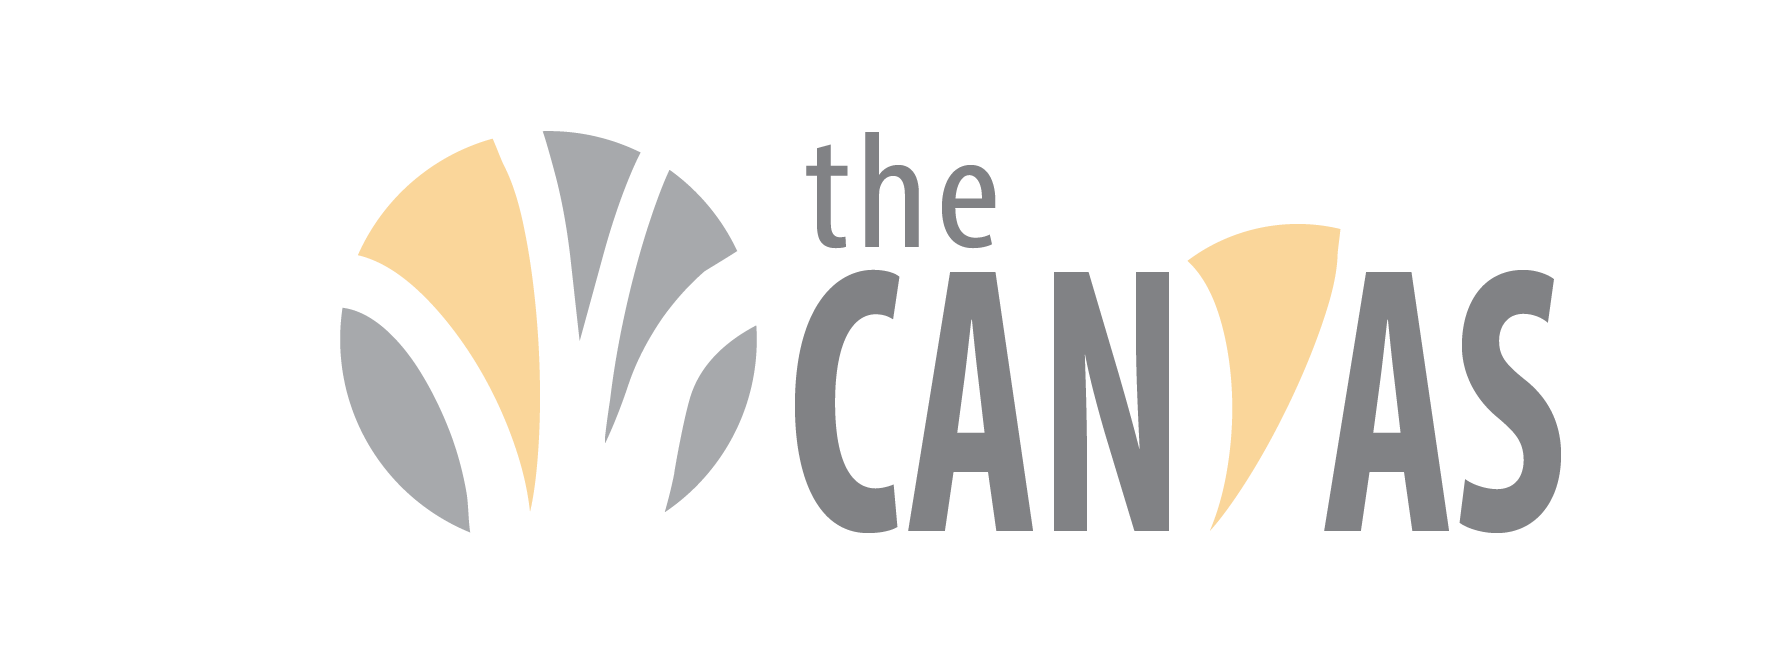 The Canvas Logo_Final1.png